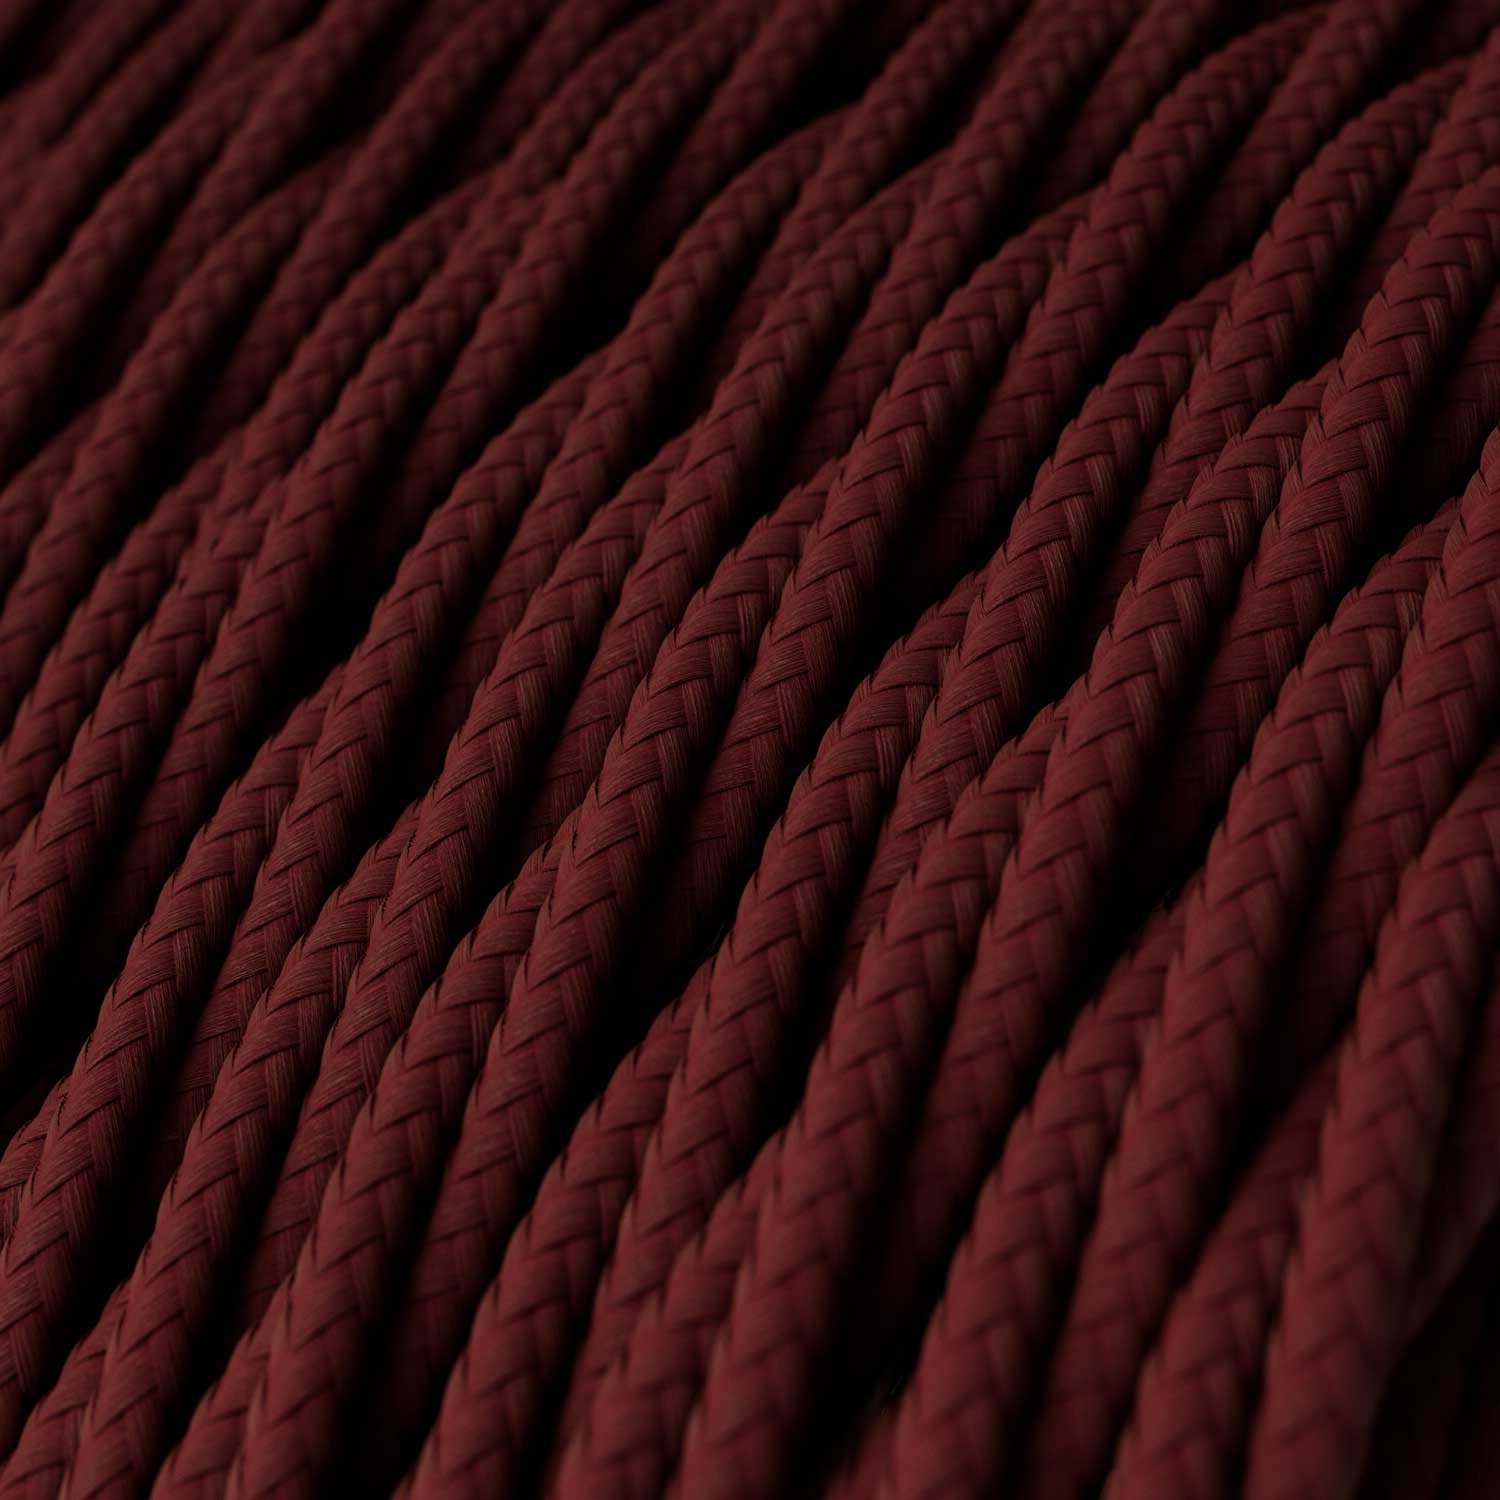 Burgundy Rayon covered Twisted electric cable 2x18 AWG - TM19